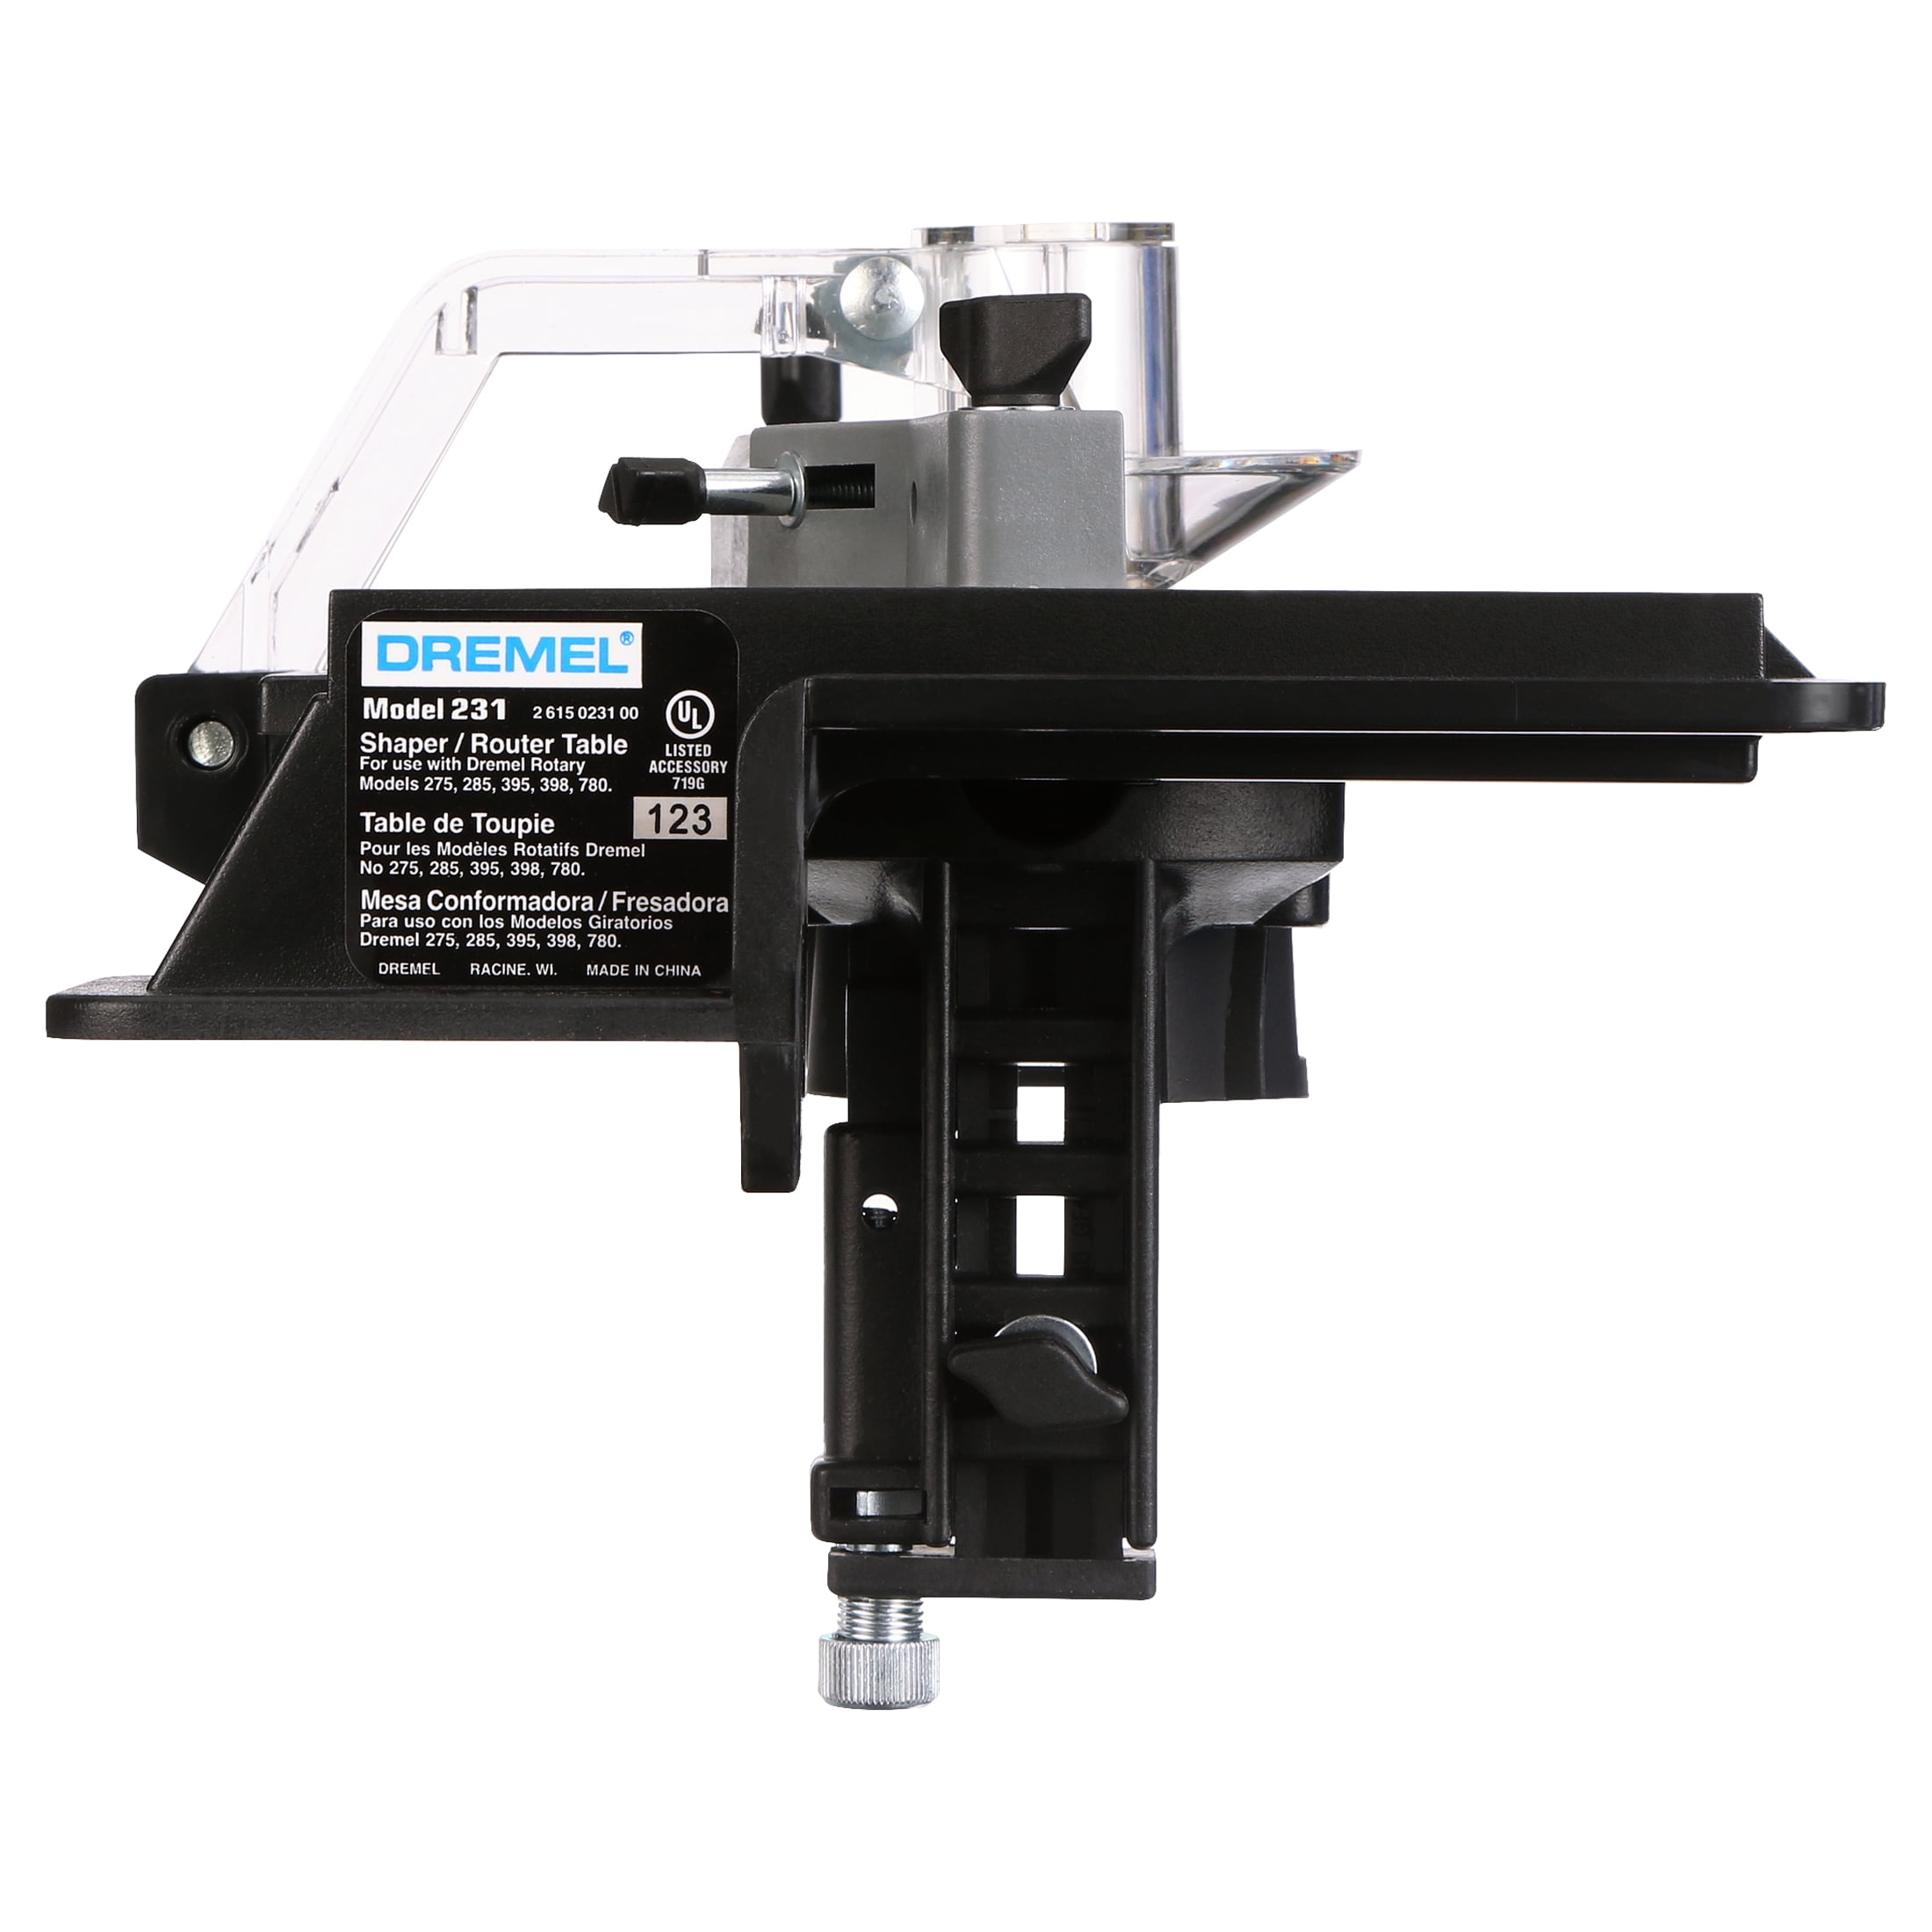 231 Rotary Tool Shaper/Router Table to Sand, Groove, and Slot Wood - Walmart.com